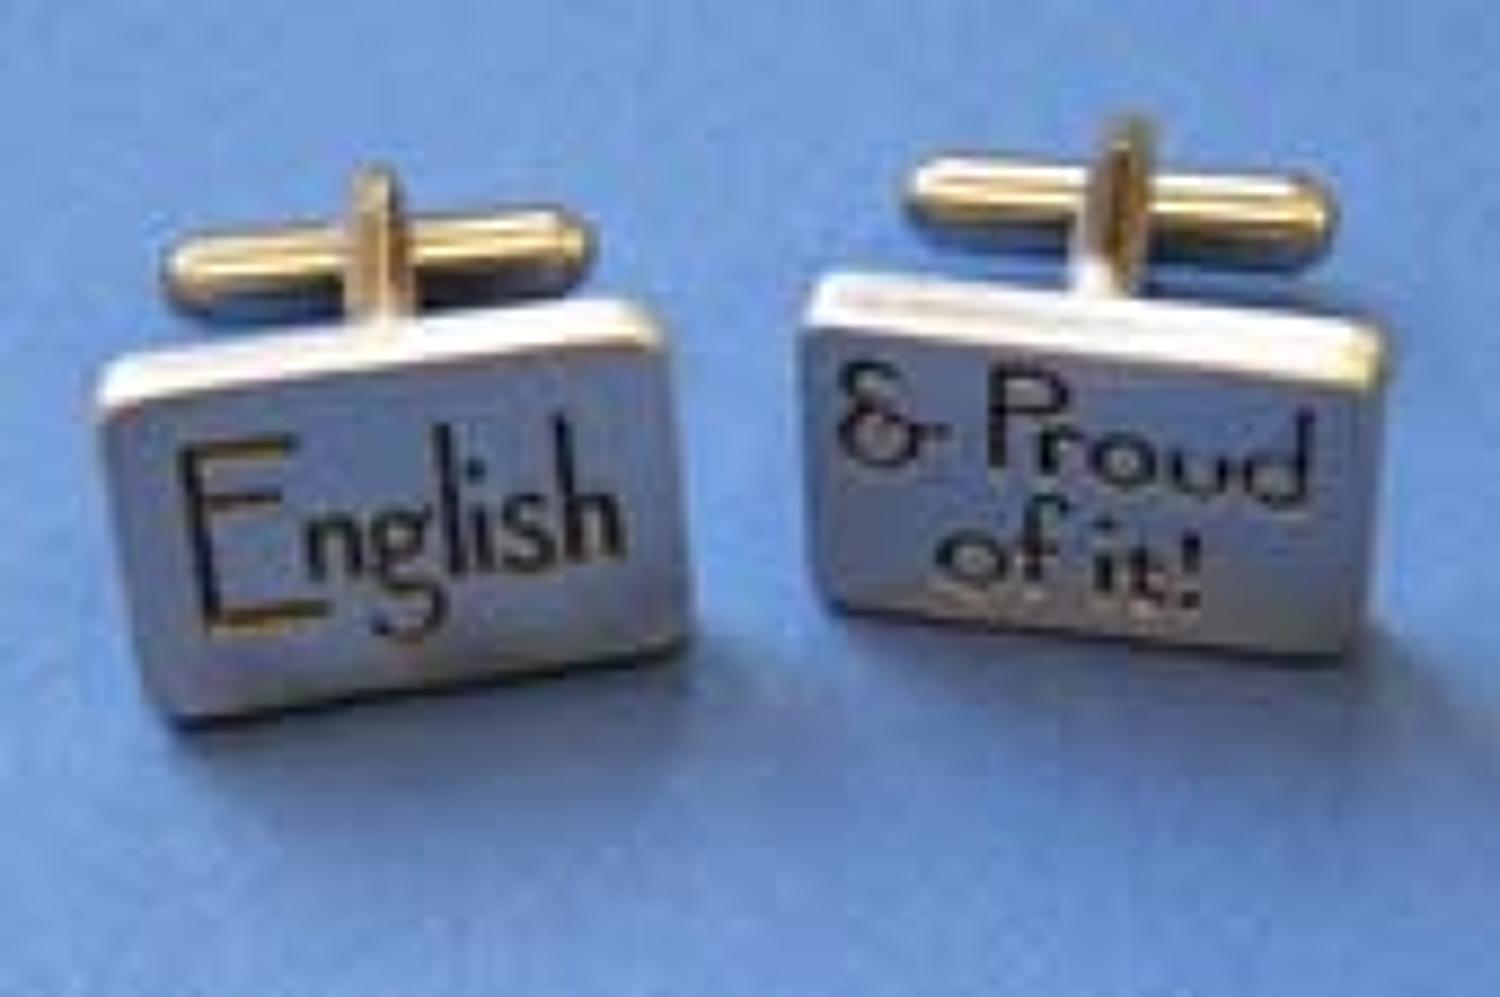 CL0683 English & Proud